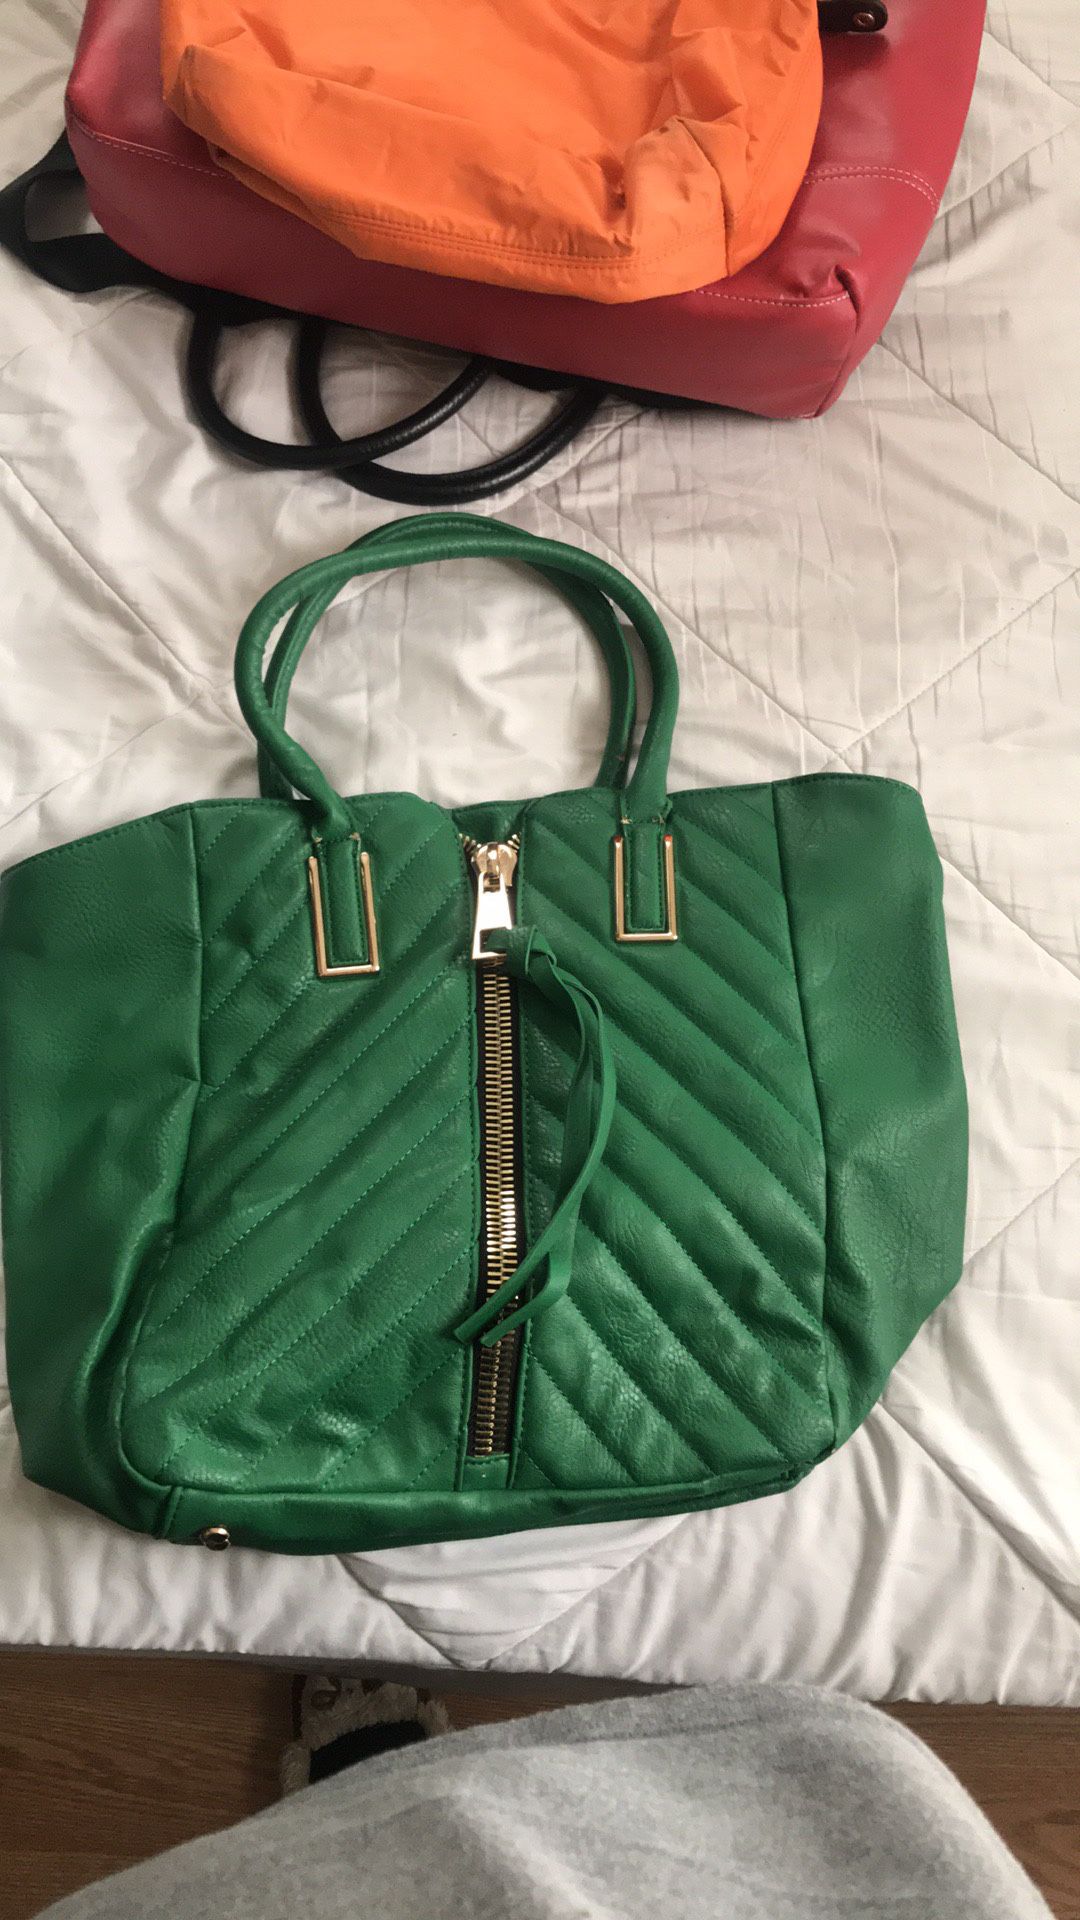 Green & gold tote